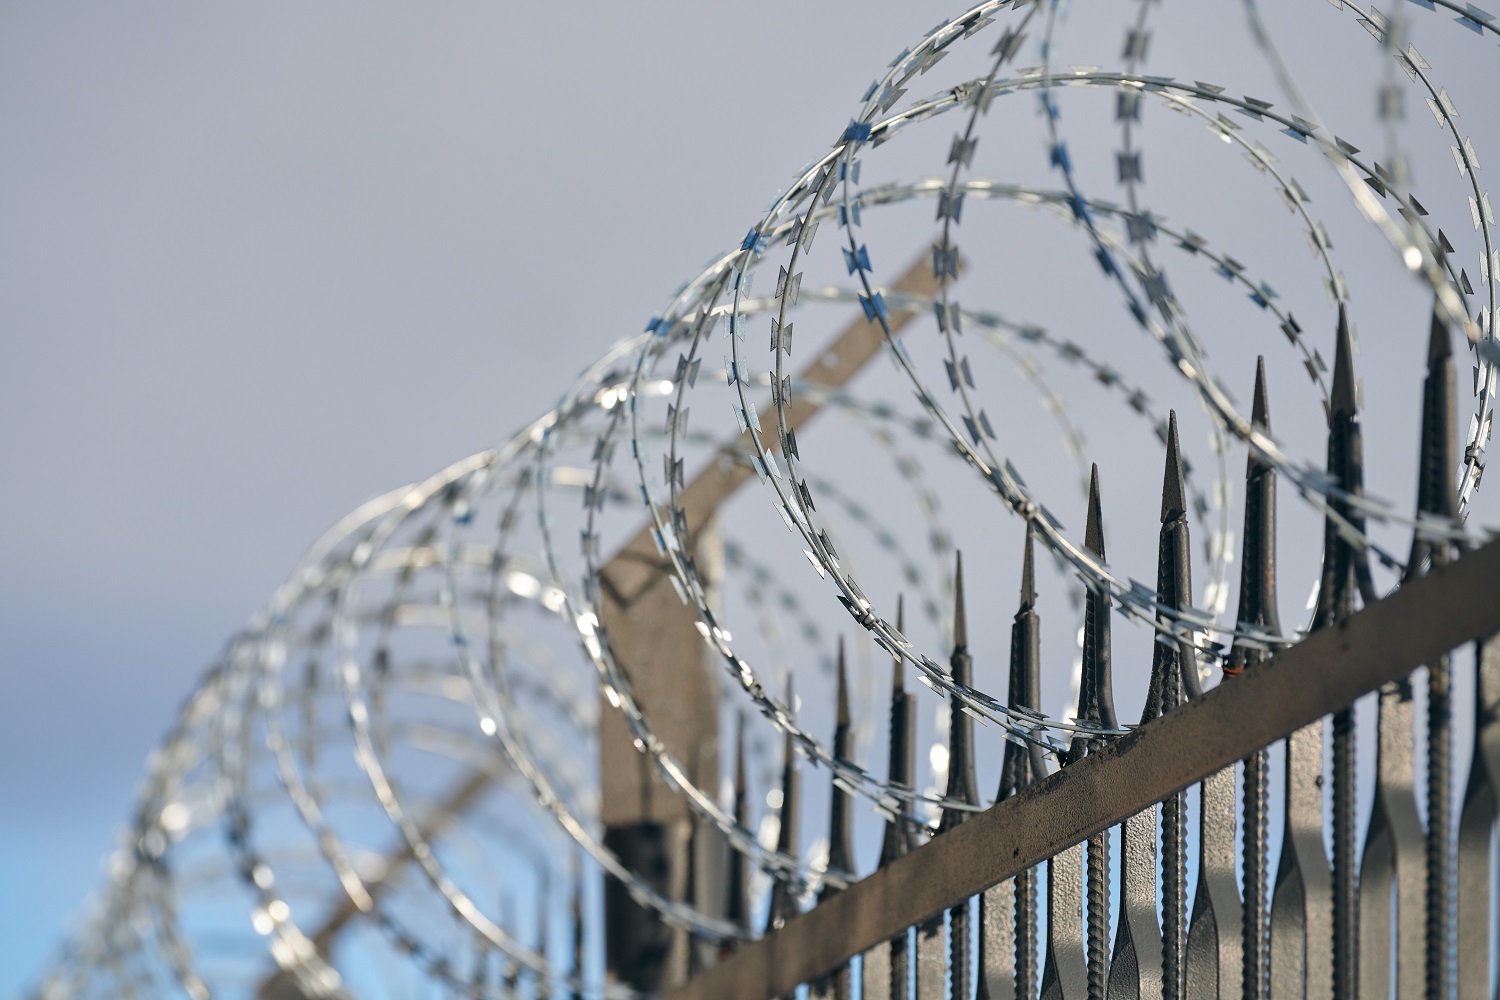 Barbed wire on a prison fence.